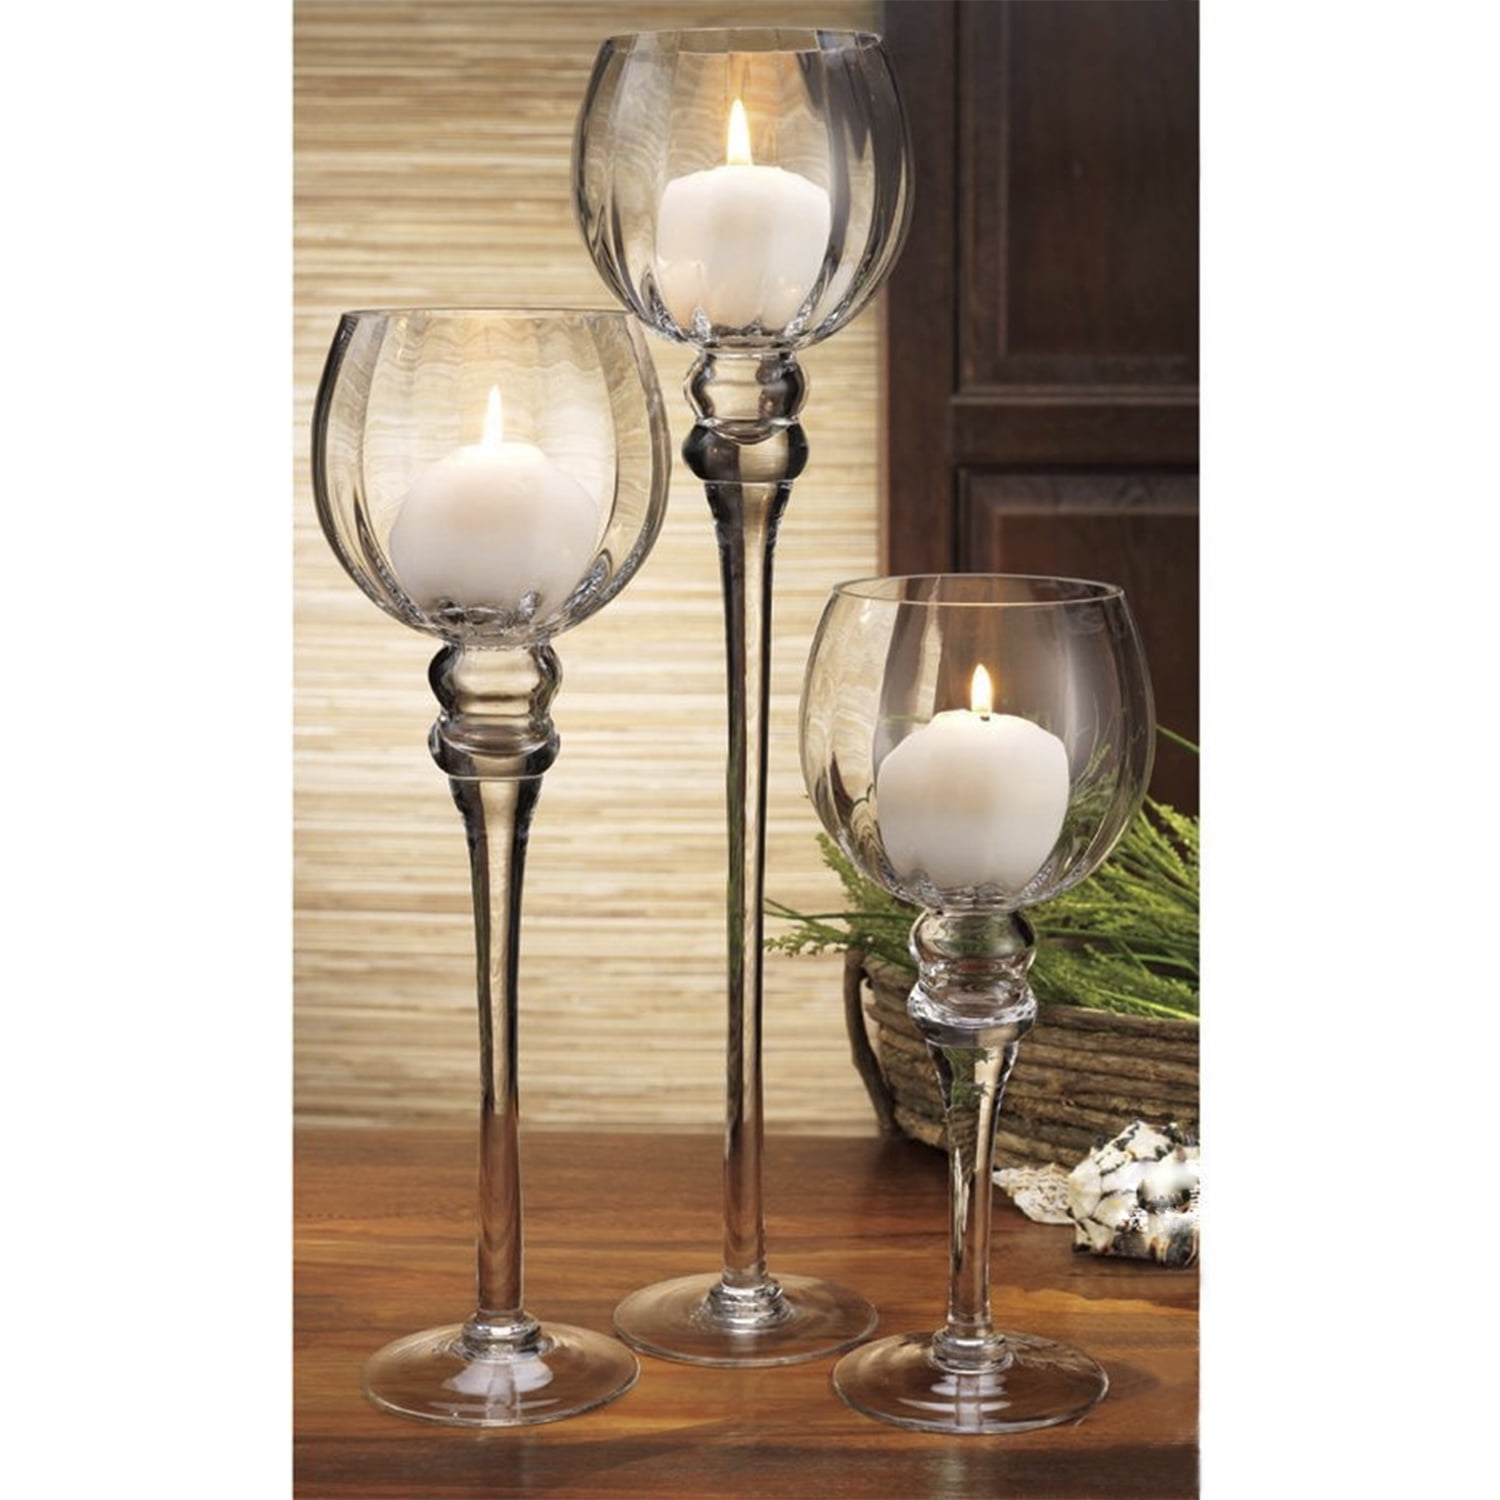 Giant Clear Wine Glass Shaped Candle Holder Set Set Of 3 Glass Pillar Tea Light Candle Holder